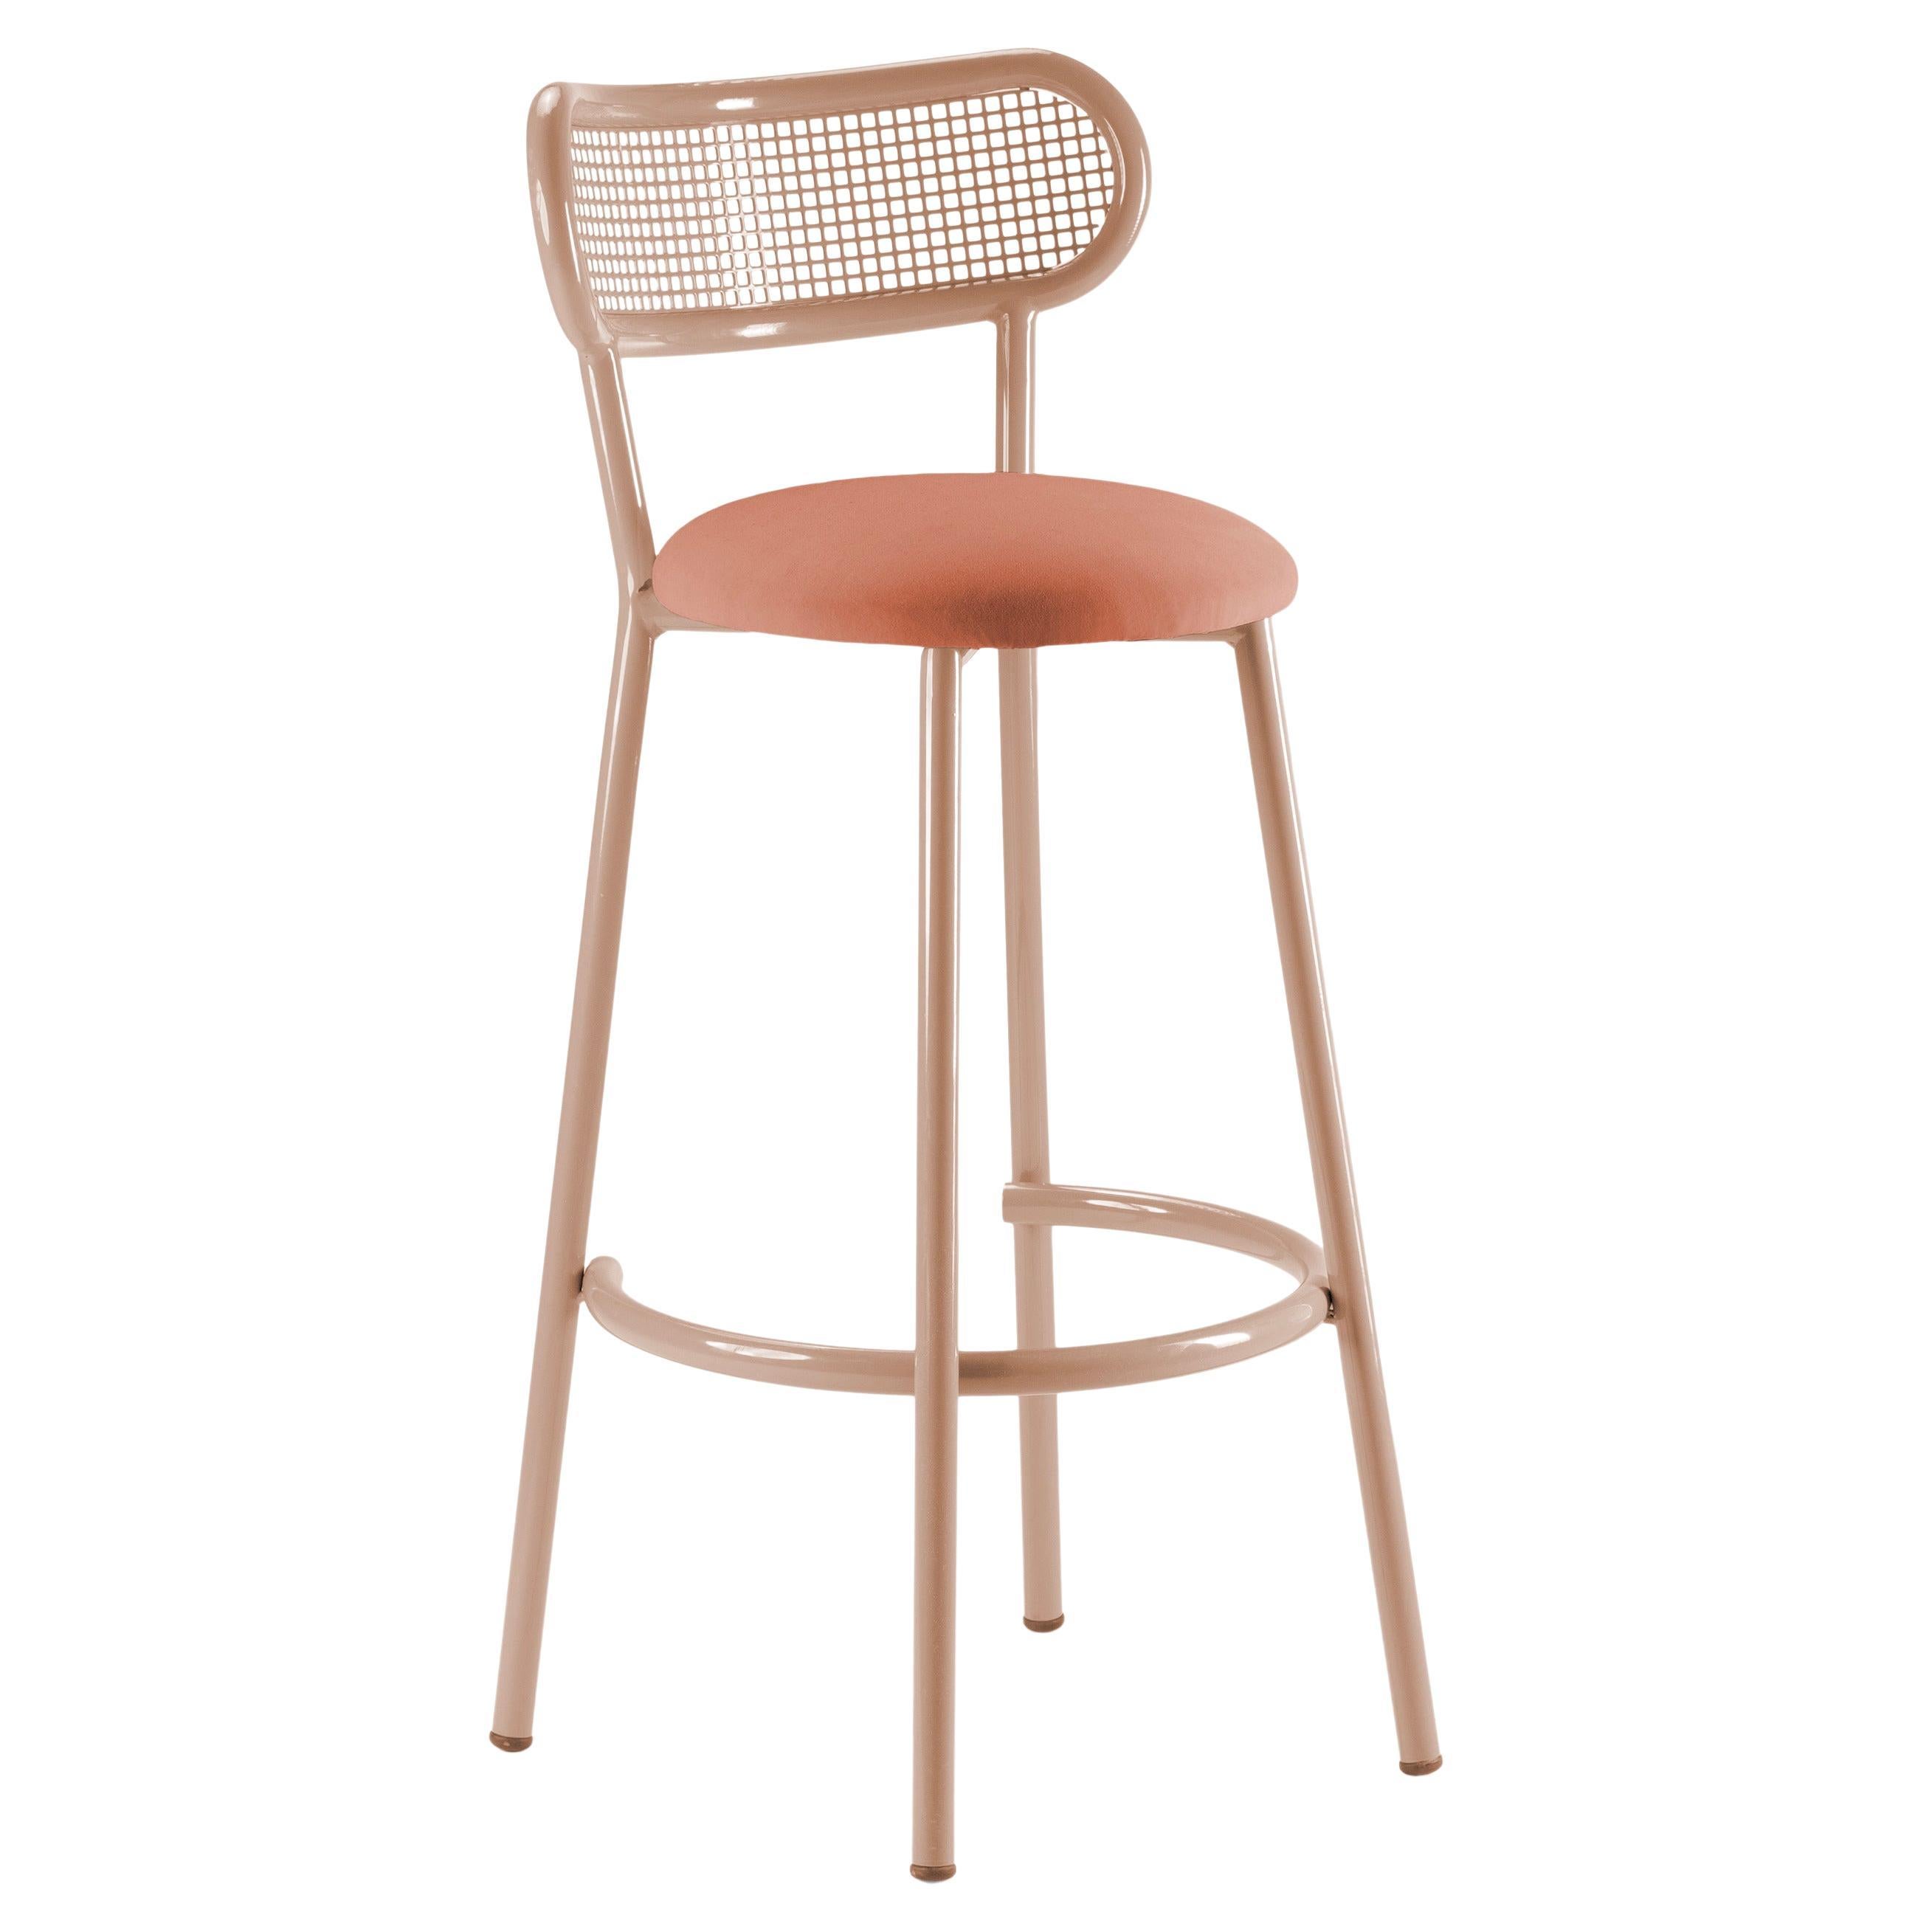 Louise Bar Chair with Salmon Structure, Perforated Steel Back and Upholstery For Sale